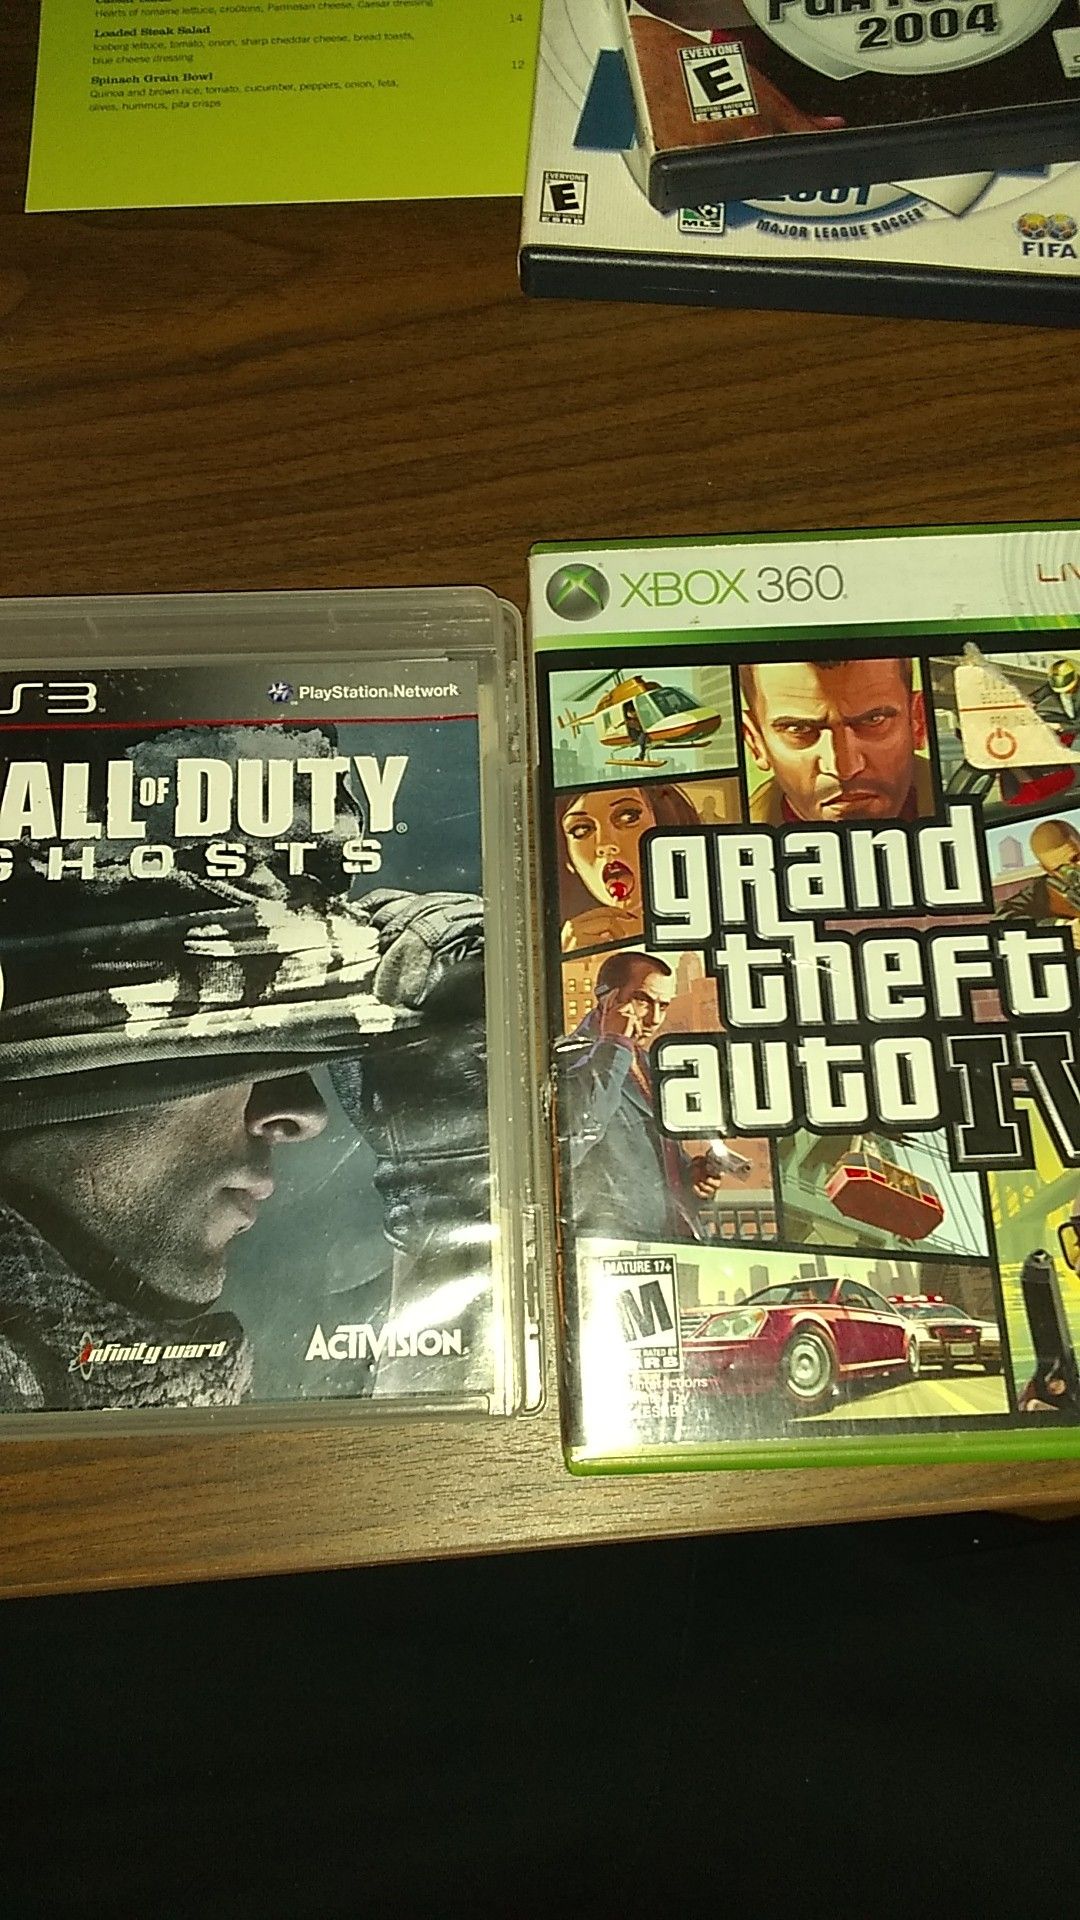 PS3 and xbox360 video games